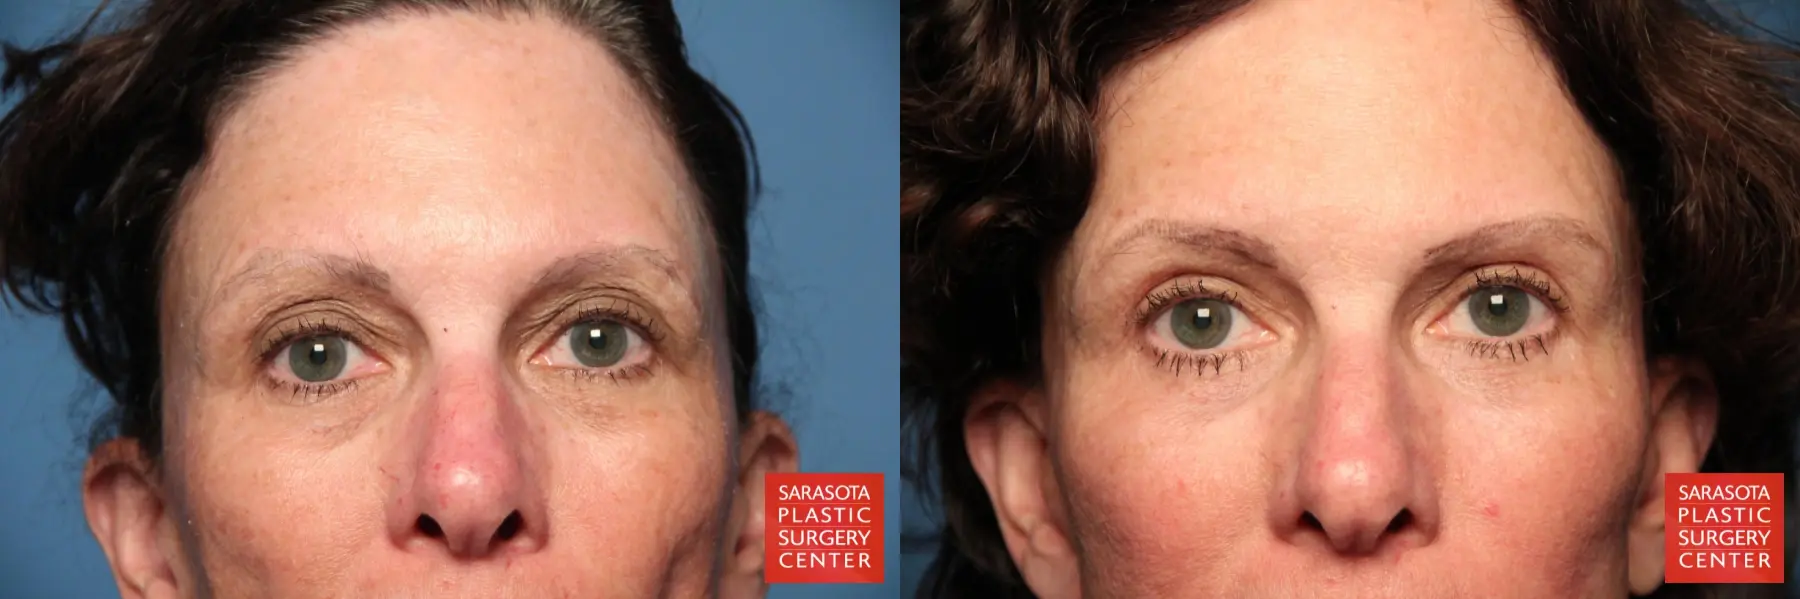 Eyelid Lift: Patient 8 - Before and After 1